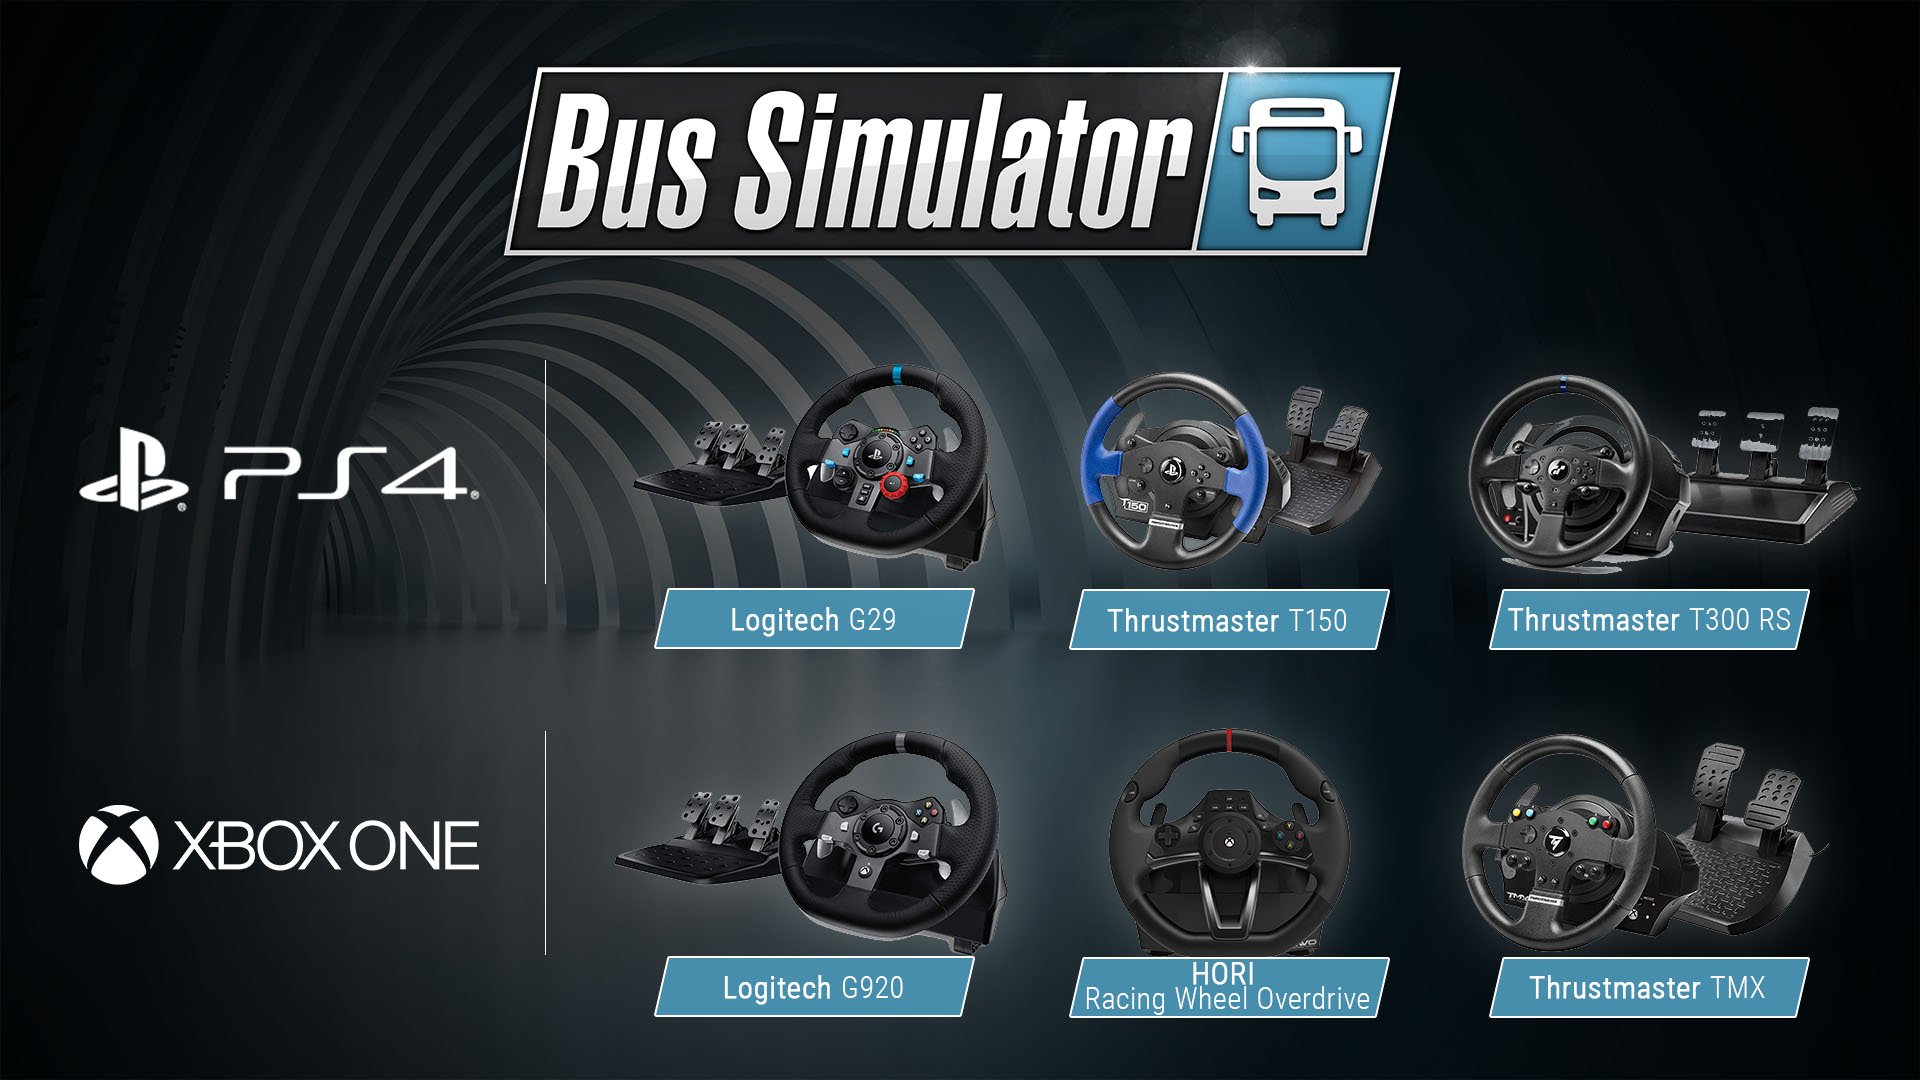 Bus Simulator on Twitter: "By popular demand, today we present you an overview of the steering wheels supported by Bus Simulator for PS4 and Xbox One. :) #bussimulator #bus4console #stillalivestudios #